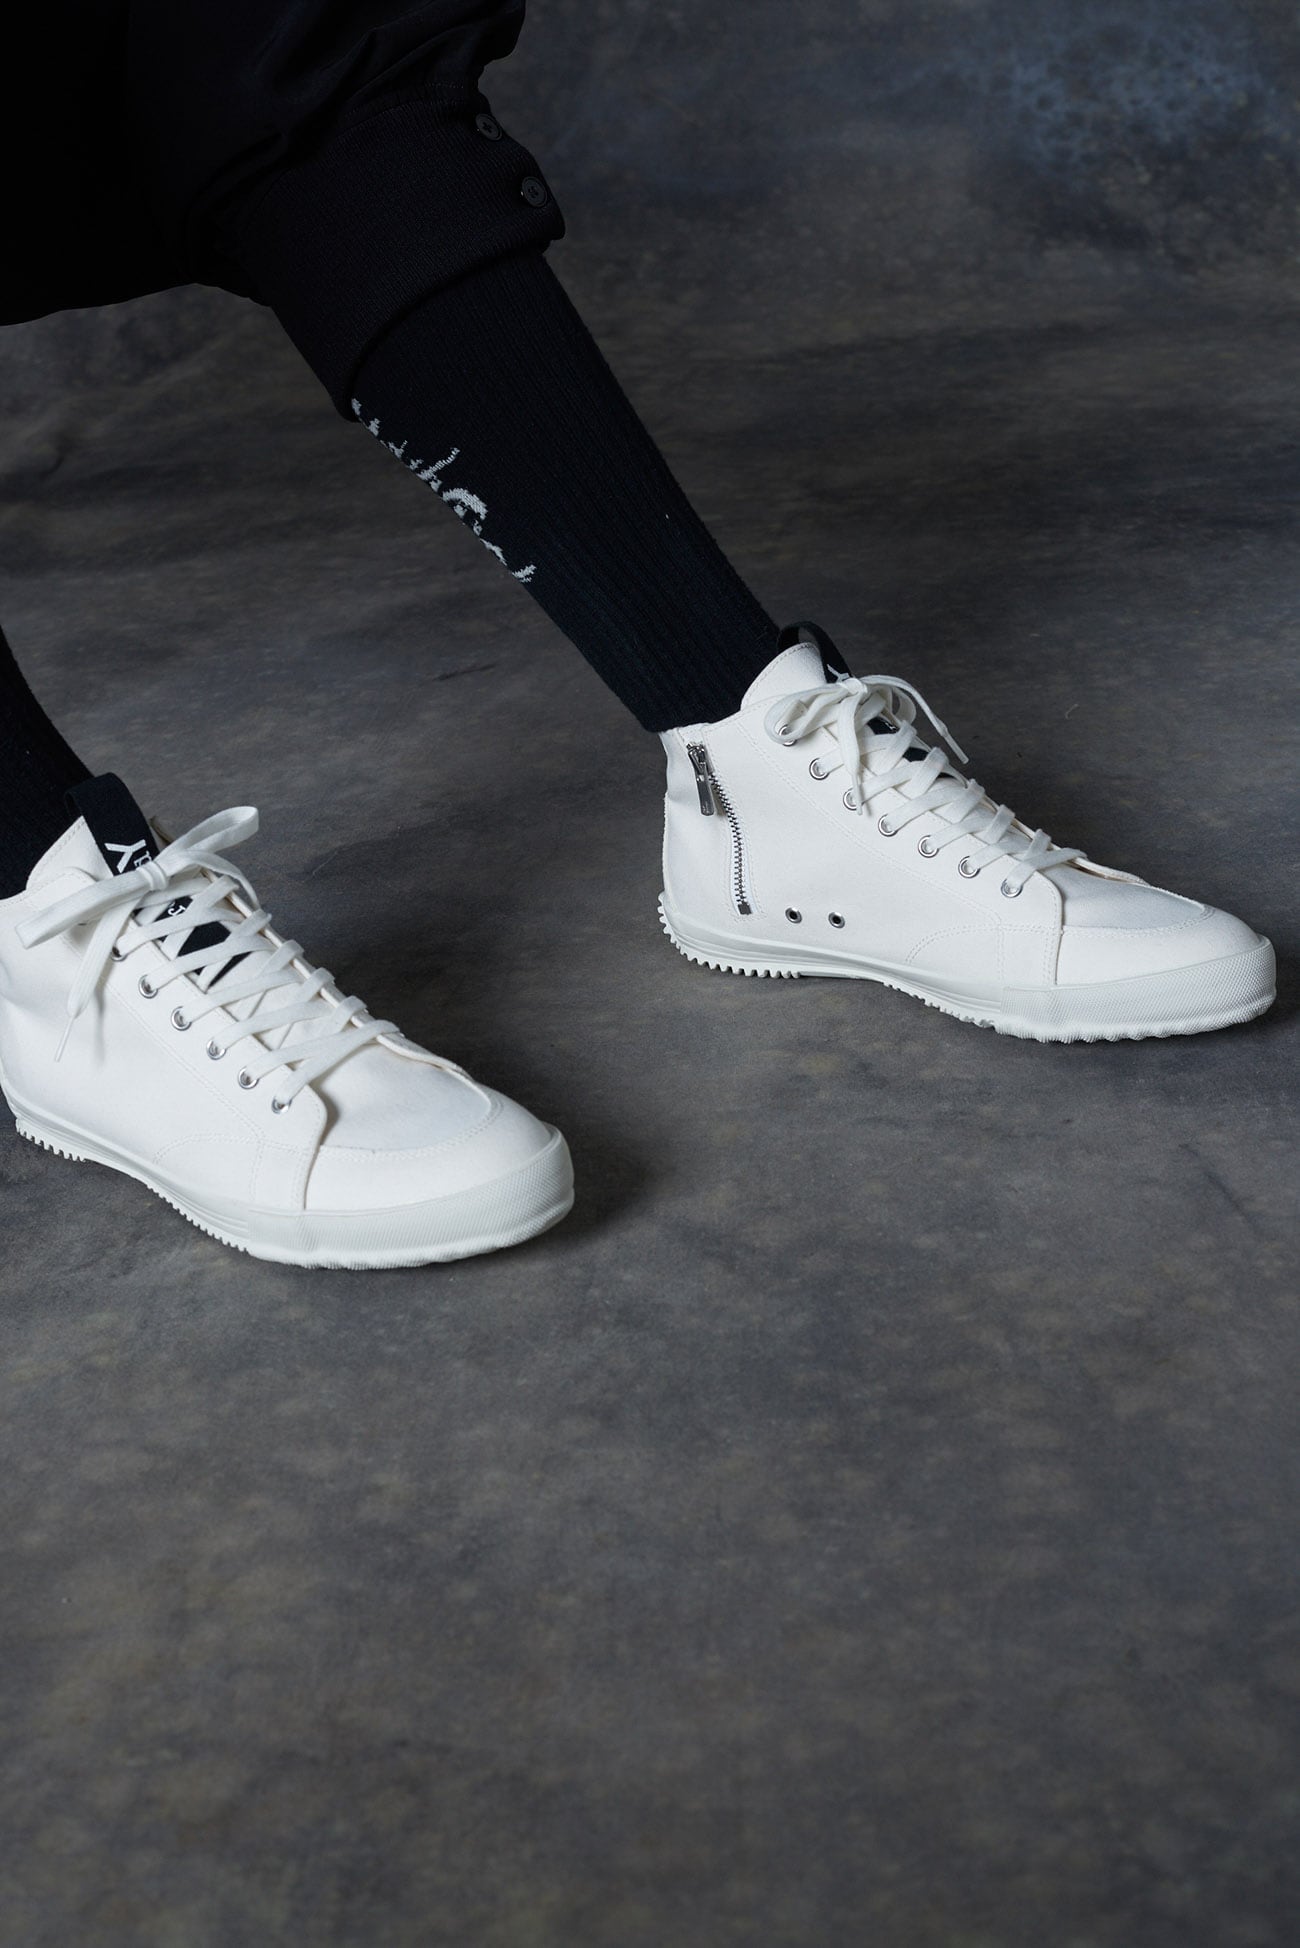 COTTON CANVAS MIDDLE RISE SNEAKERS